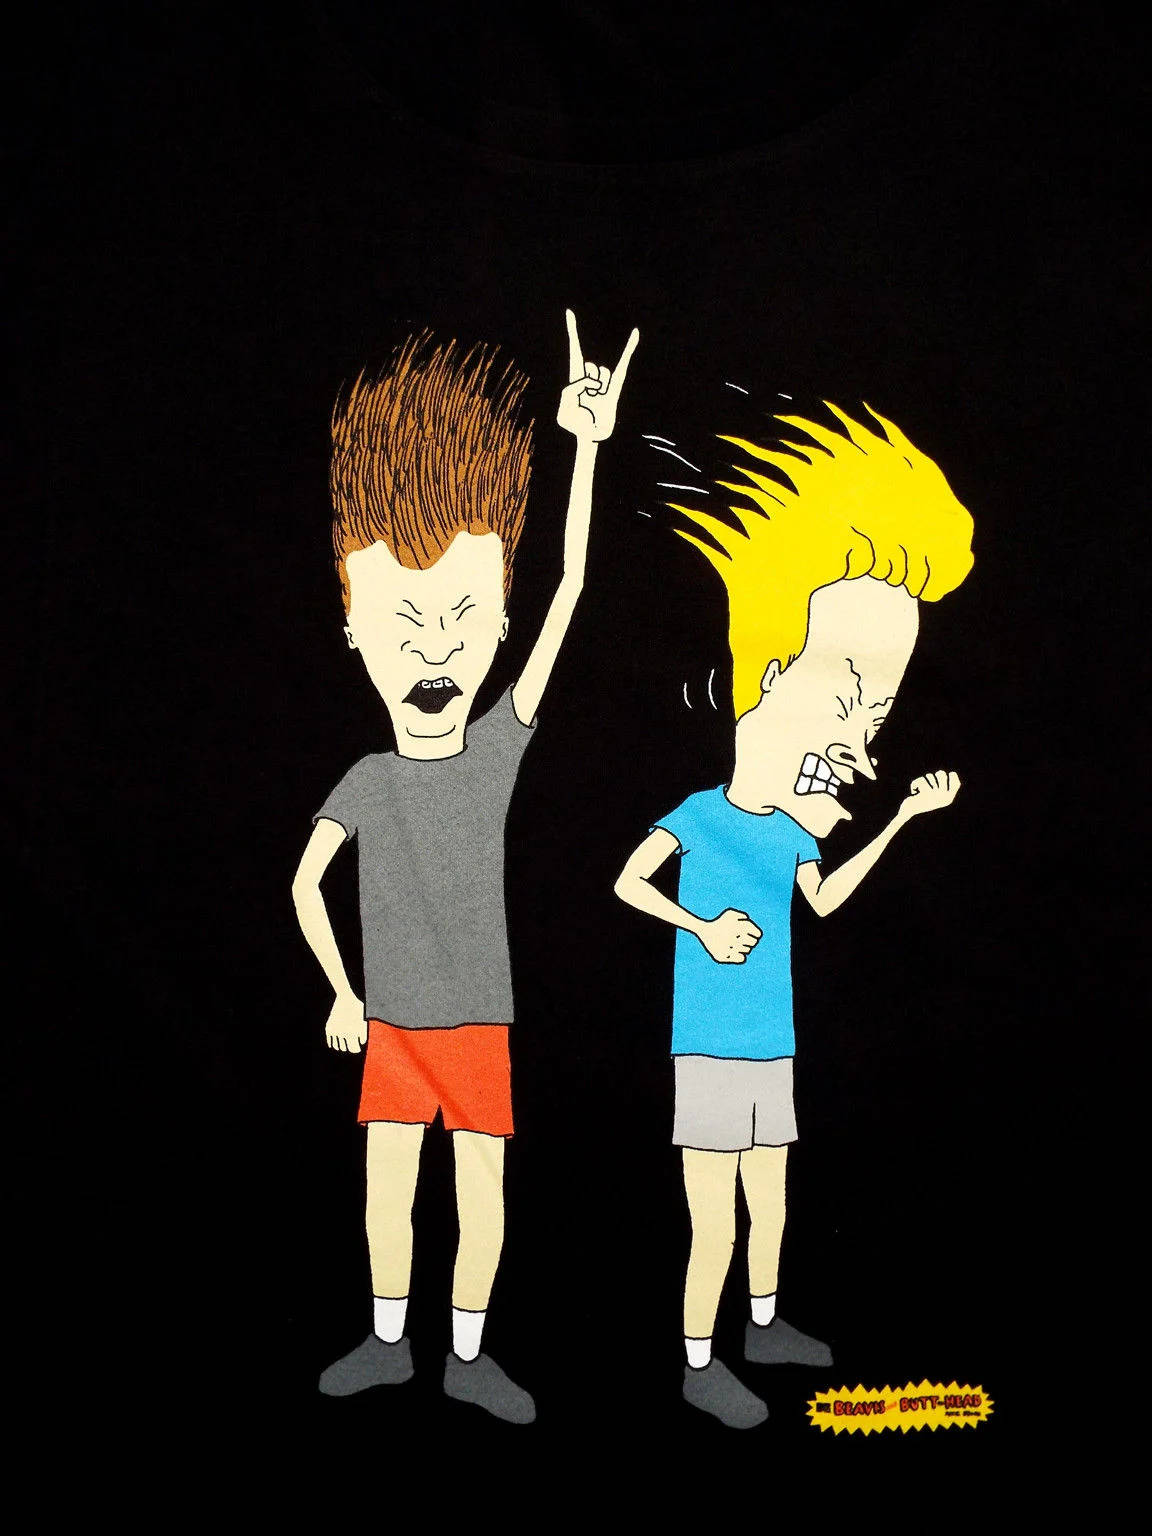 Top 999+ Beavis And Butt Head Wallpaper Full HD, 4K Free to Use